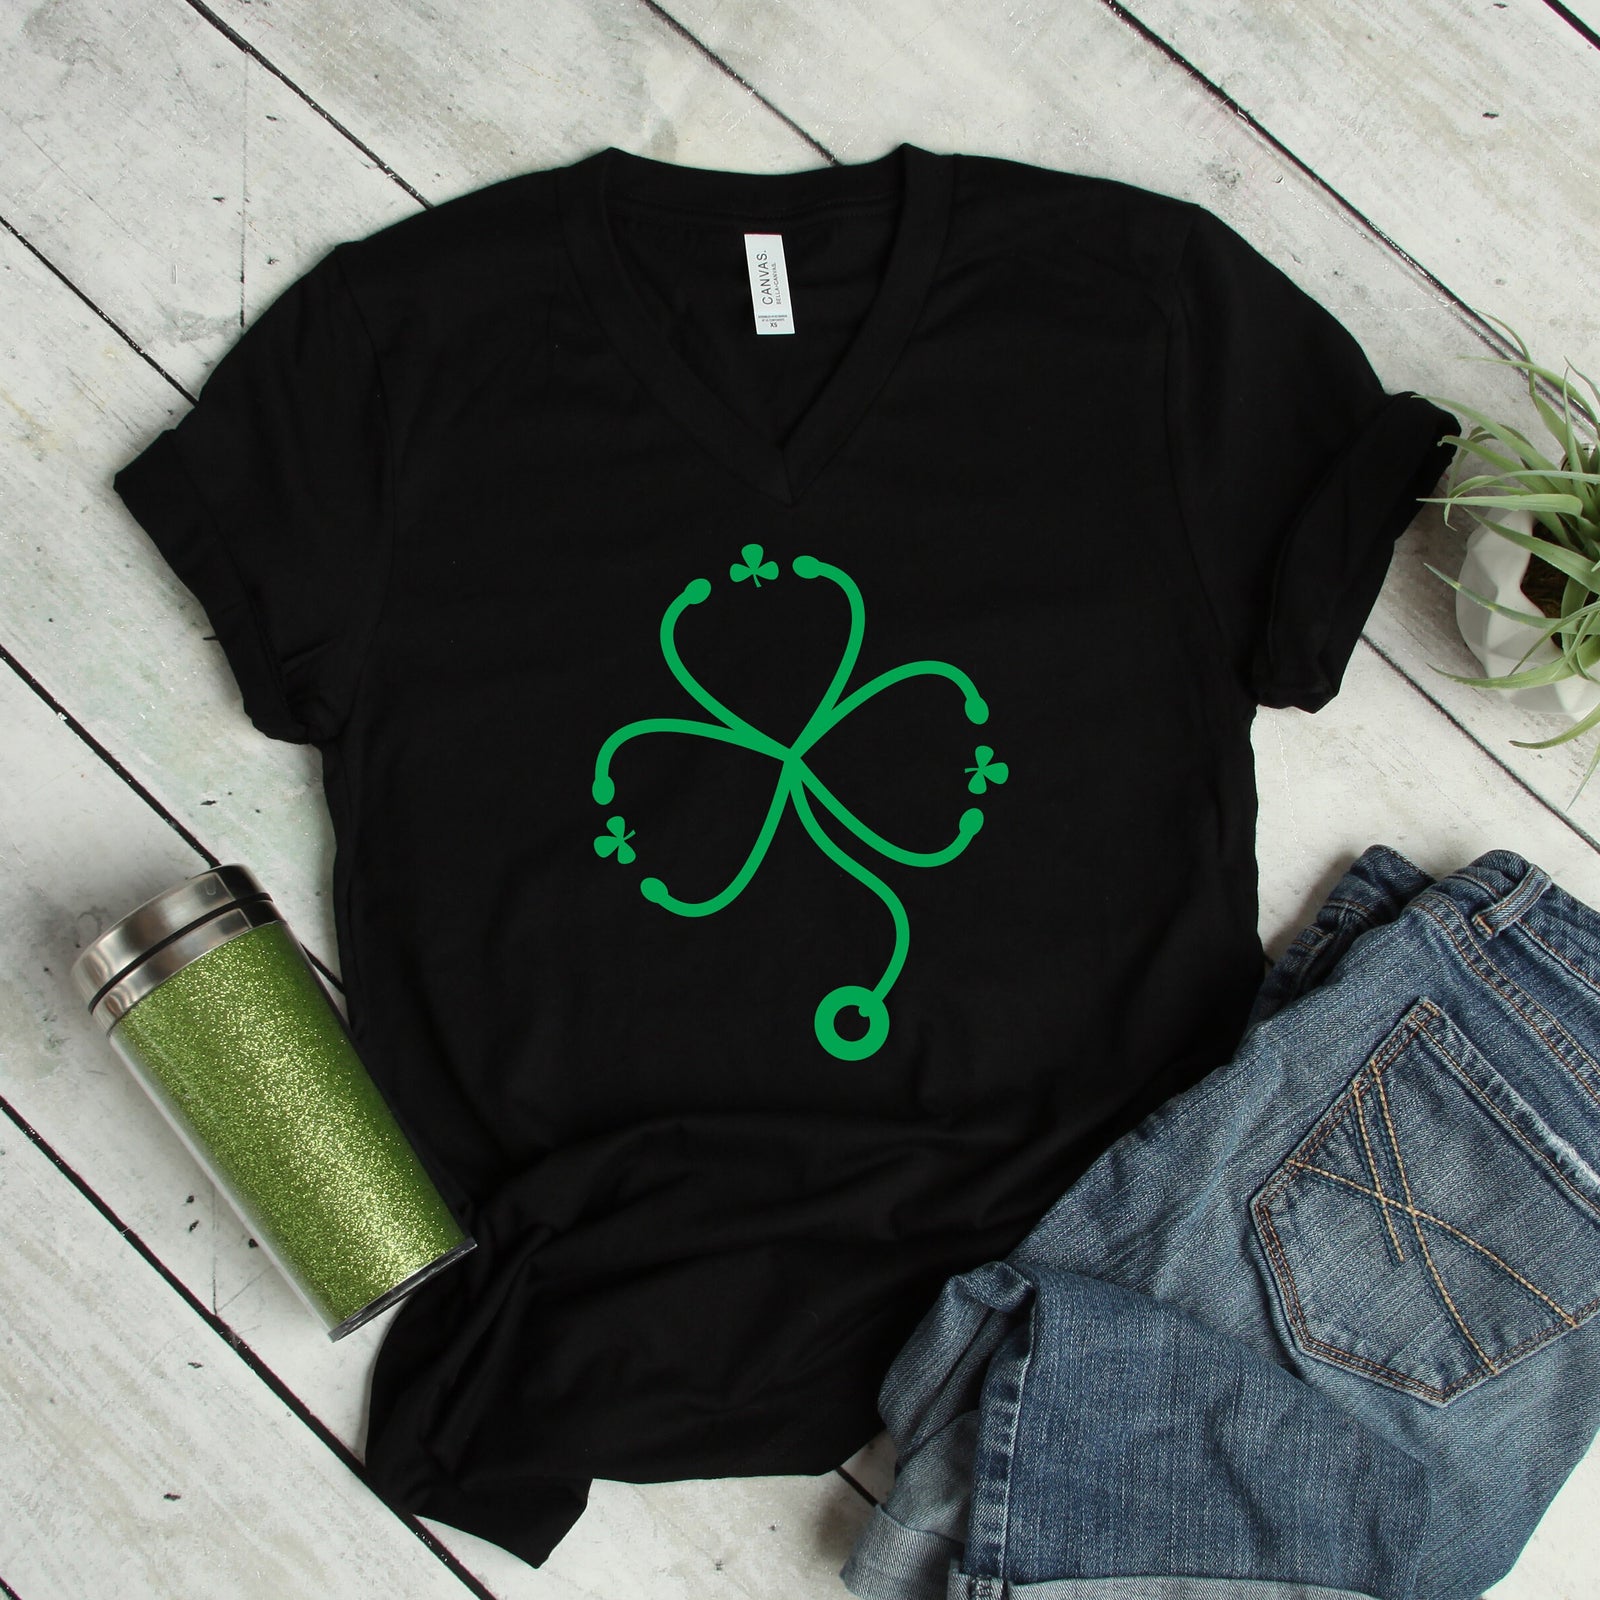 Lucky Nurse or Doctor T Shirt - St. Patrick's Day Shirt - Clover Stethoscope - Green Irish Luck - Health Care Worker